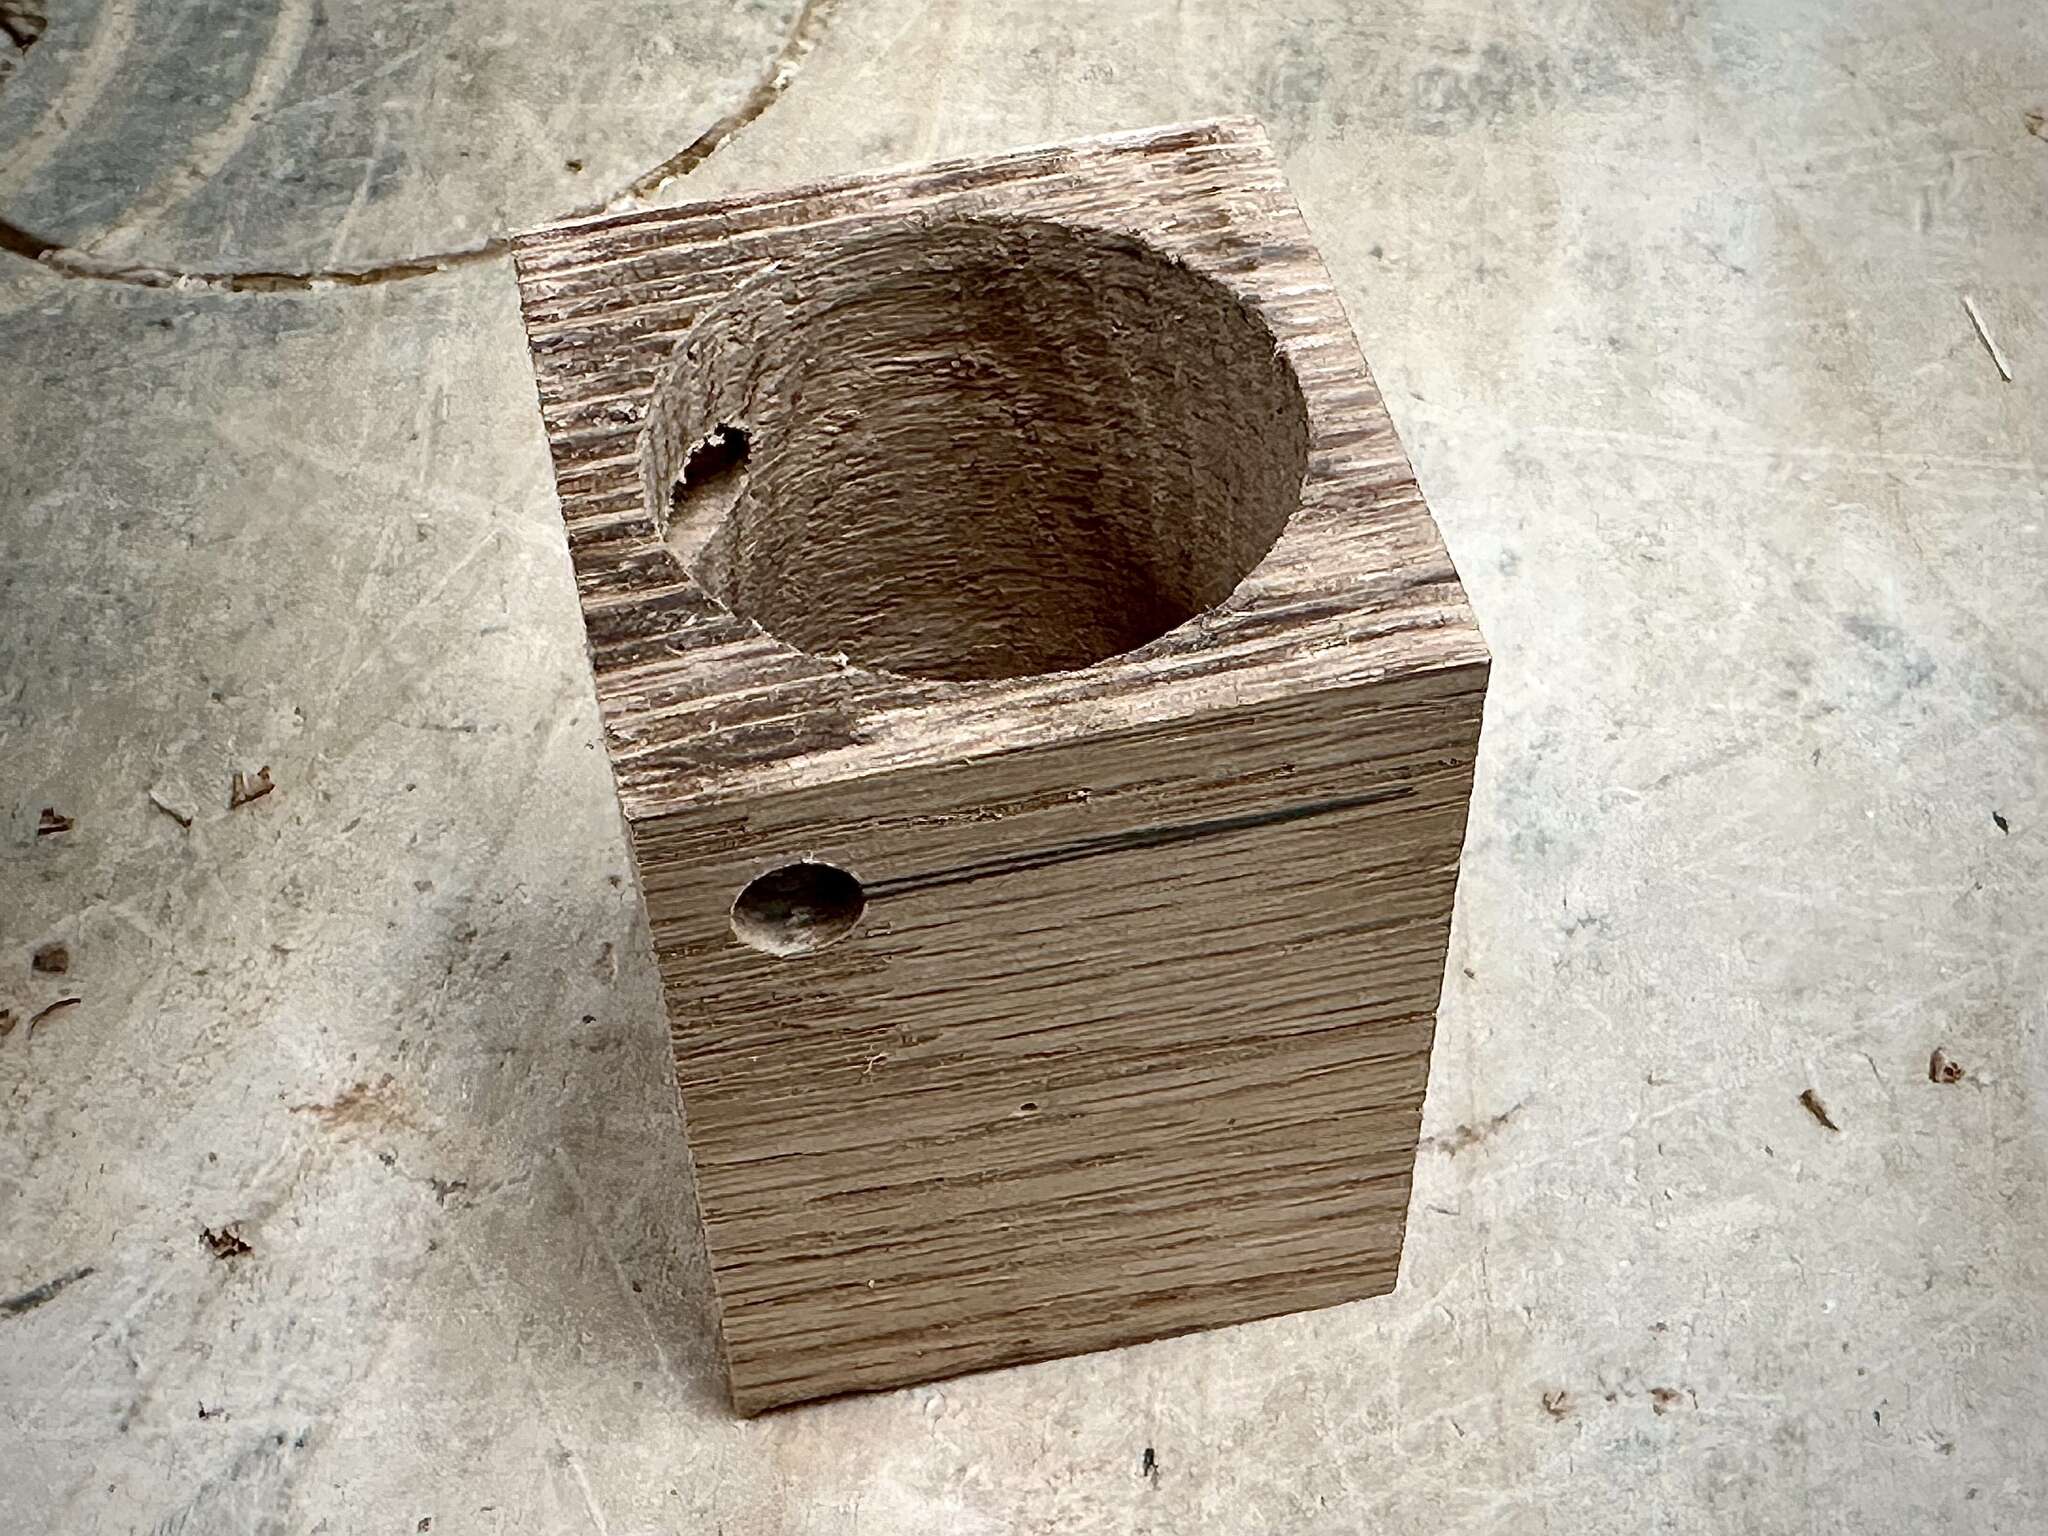 a tall cubic wood piece, with a big cylindrical hole at its center and a small hole on its side